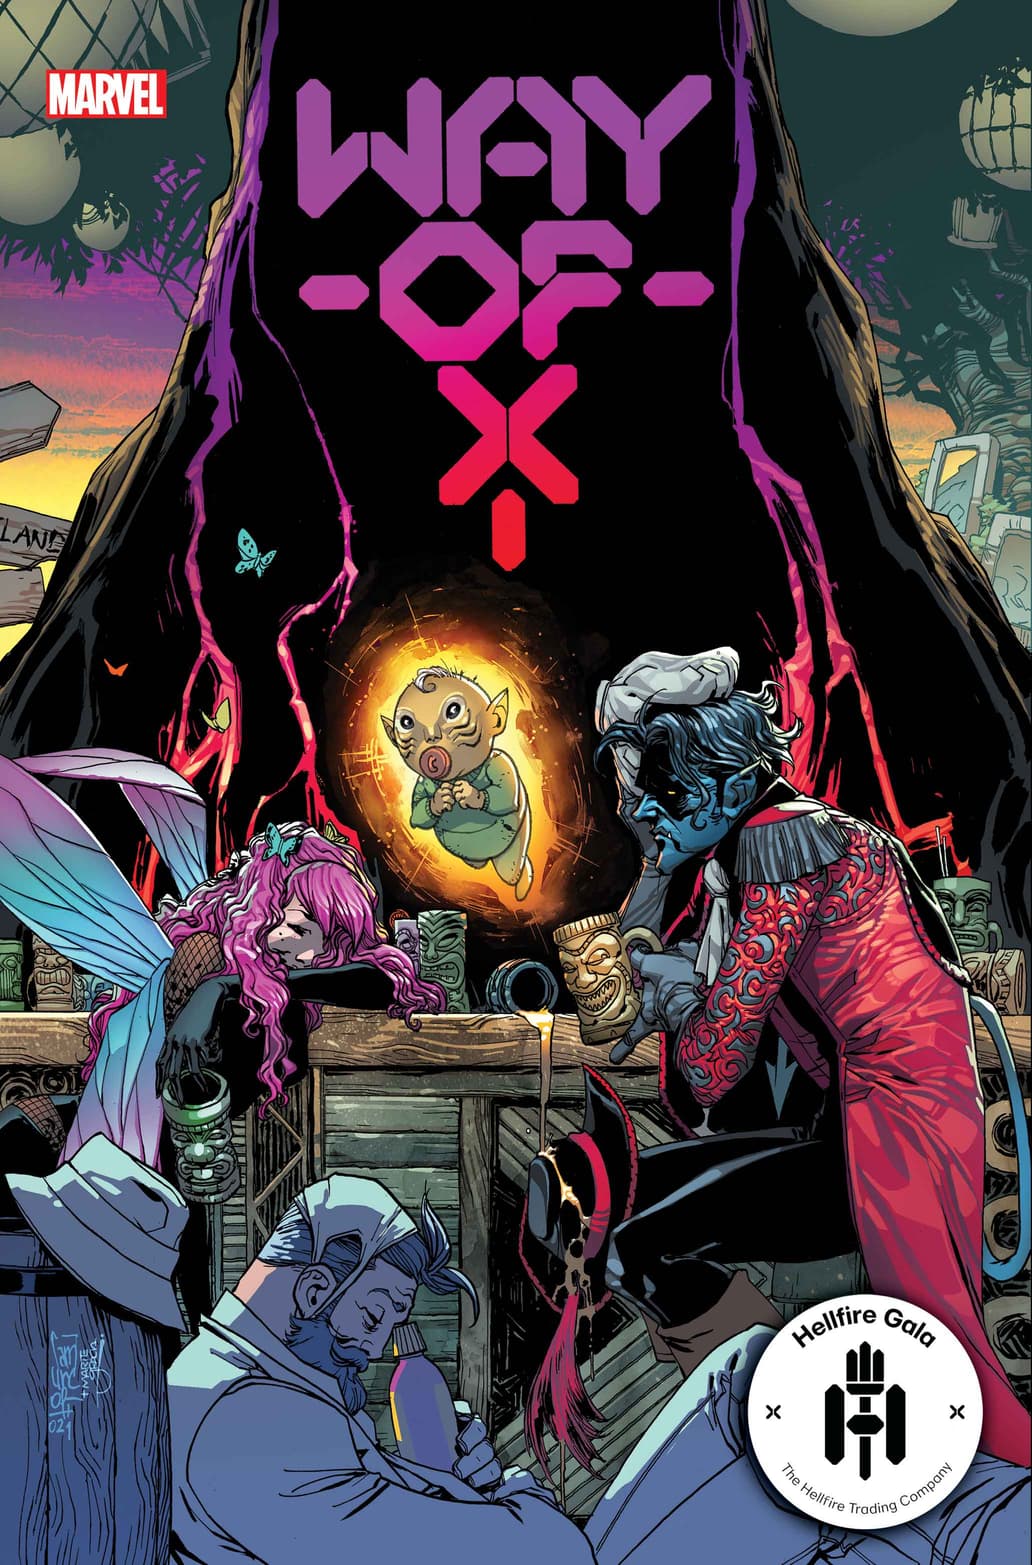 WAY OF X #3 cover by Giuseppe Camuncoli and Marte Gracia